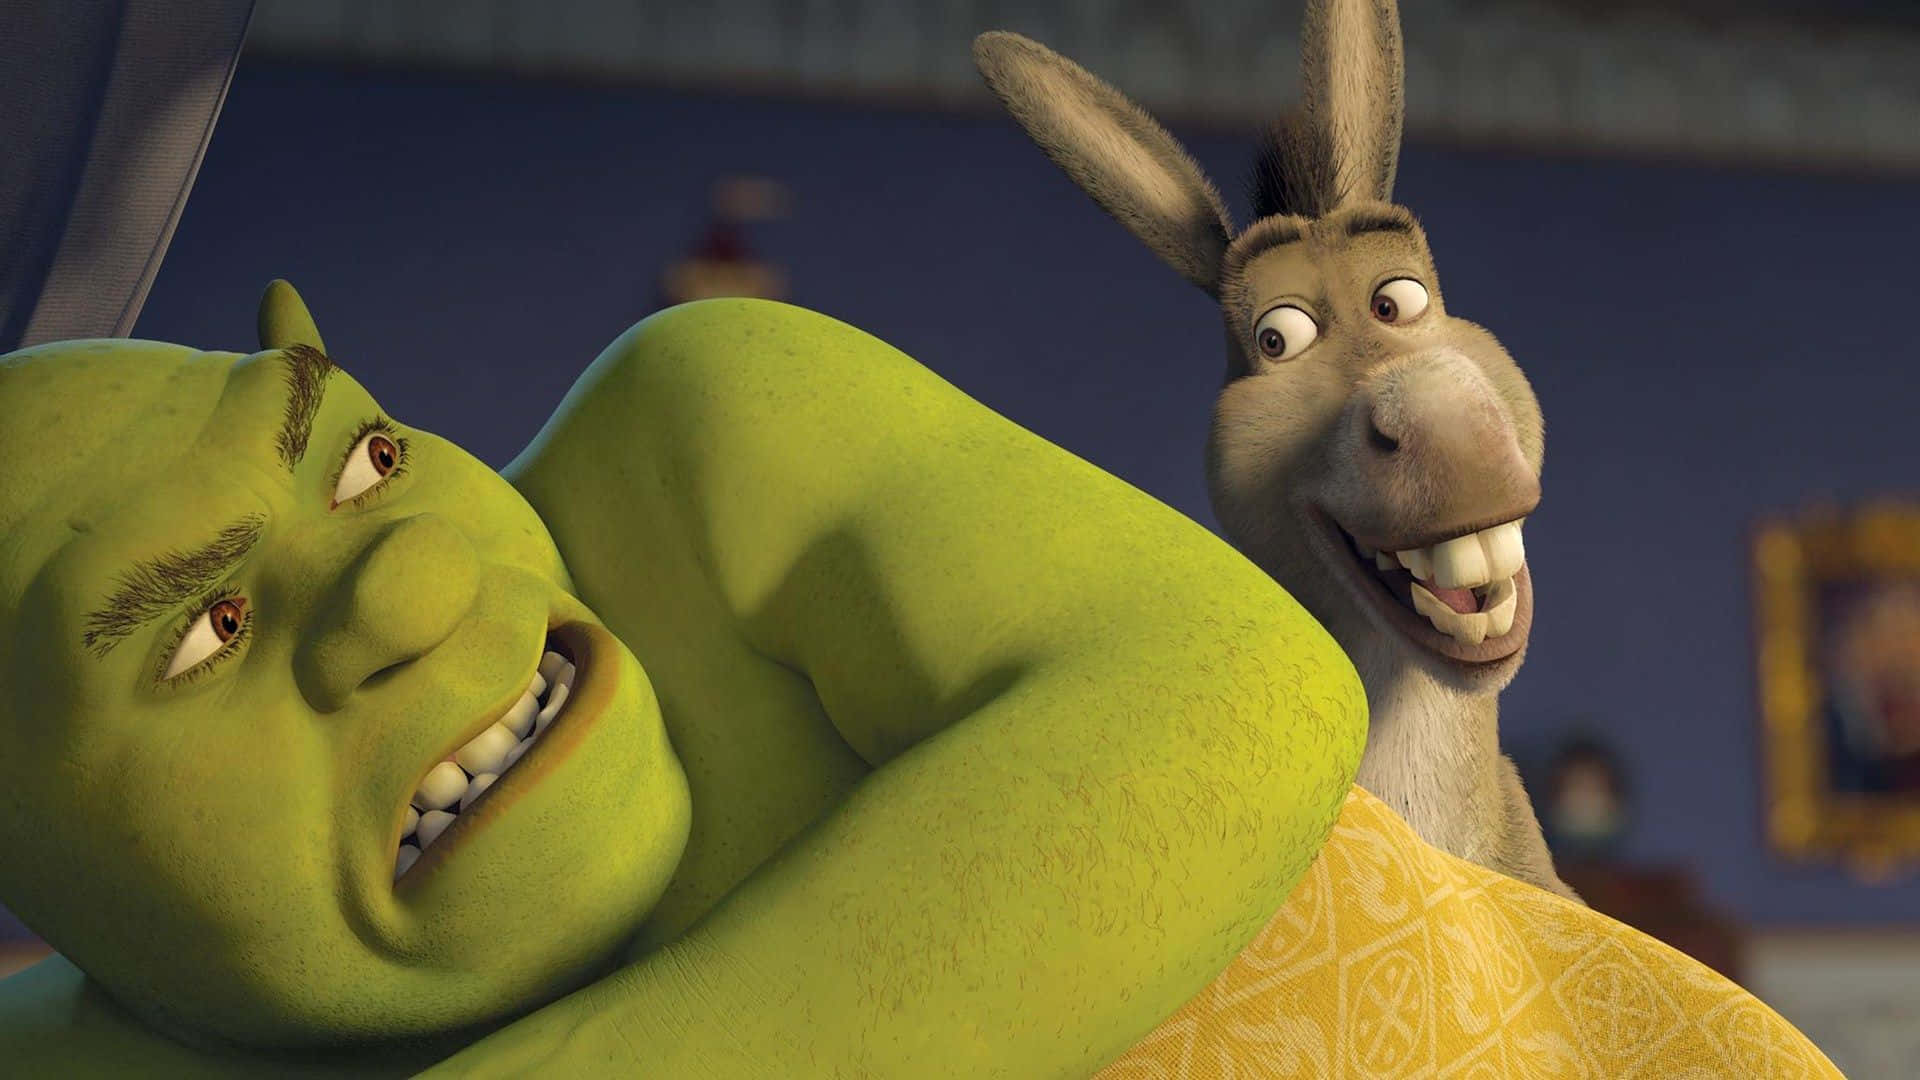 Funny Shrek In Bed Annoyed By Donkey Wallpaper